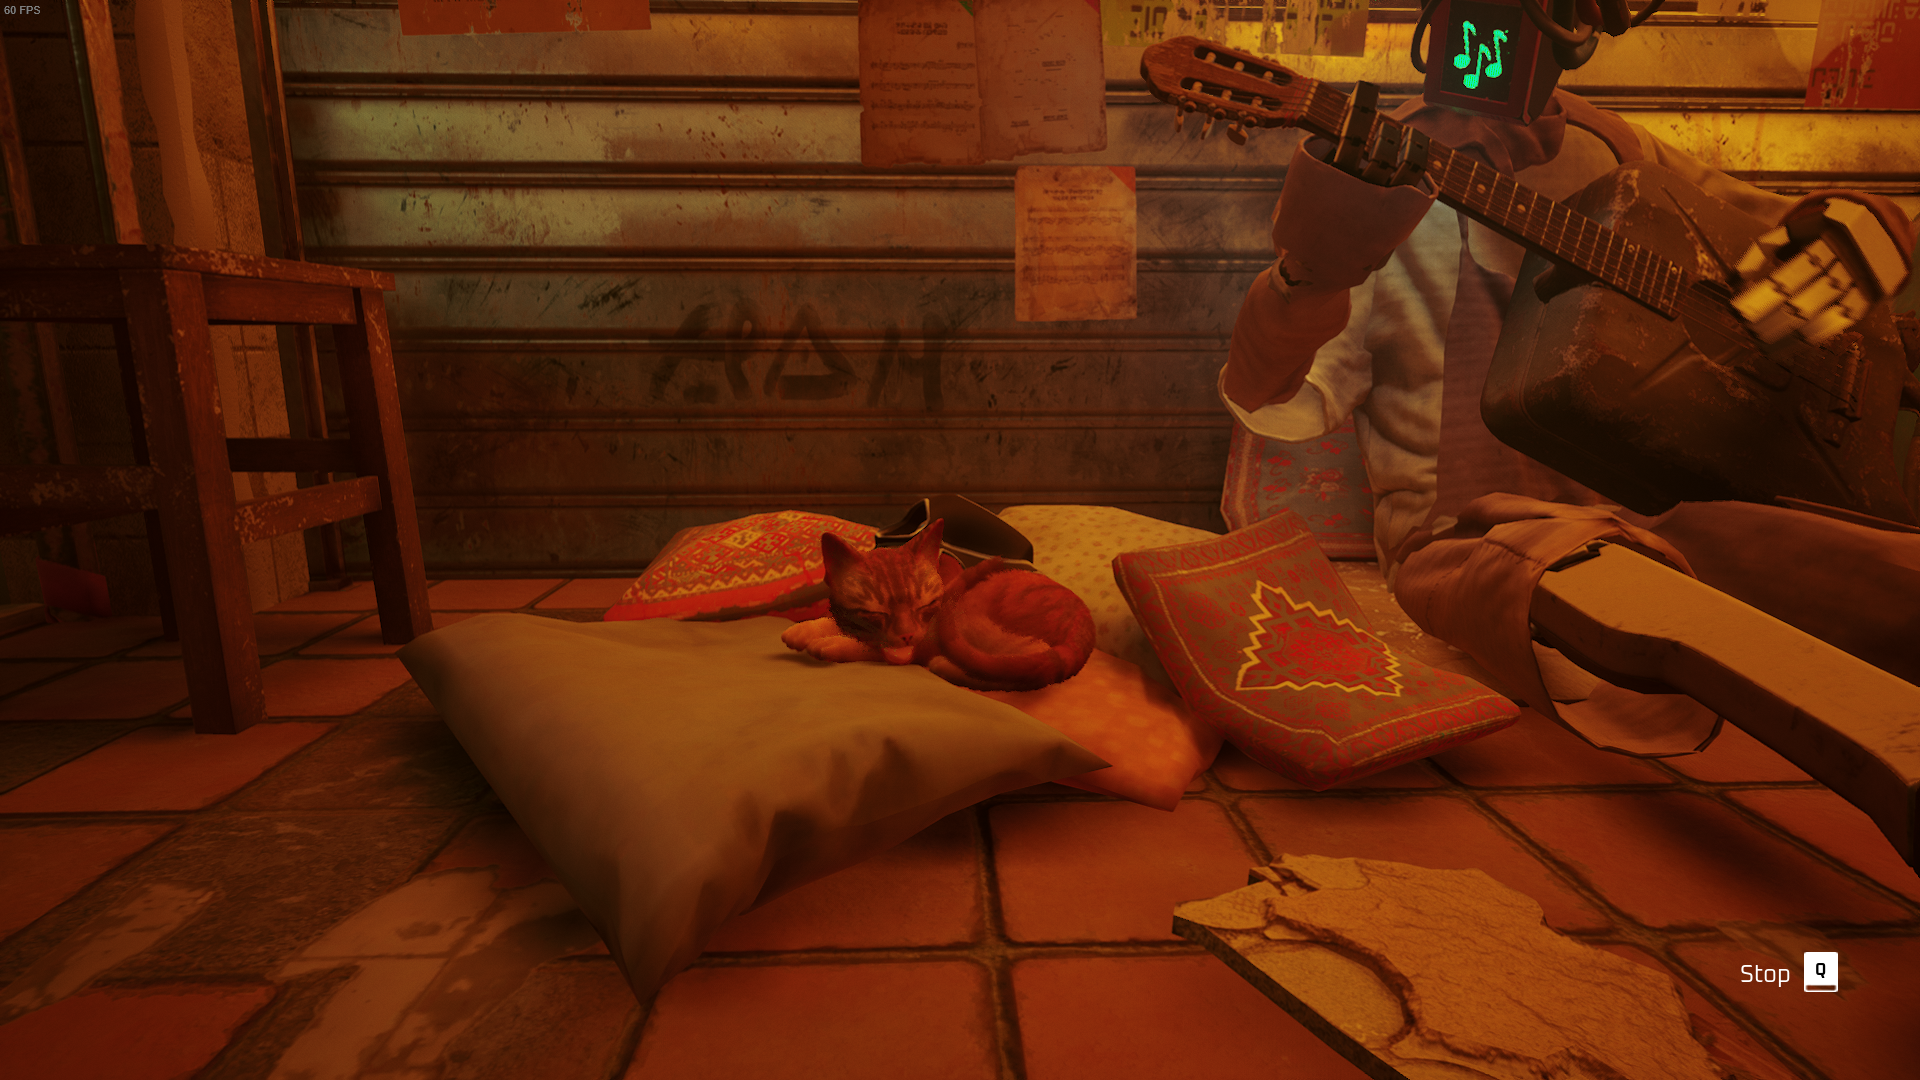 The Outsider, a cat, has a cat nap alongside musician Morusque in The Slums, while they play a song on their guitar.